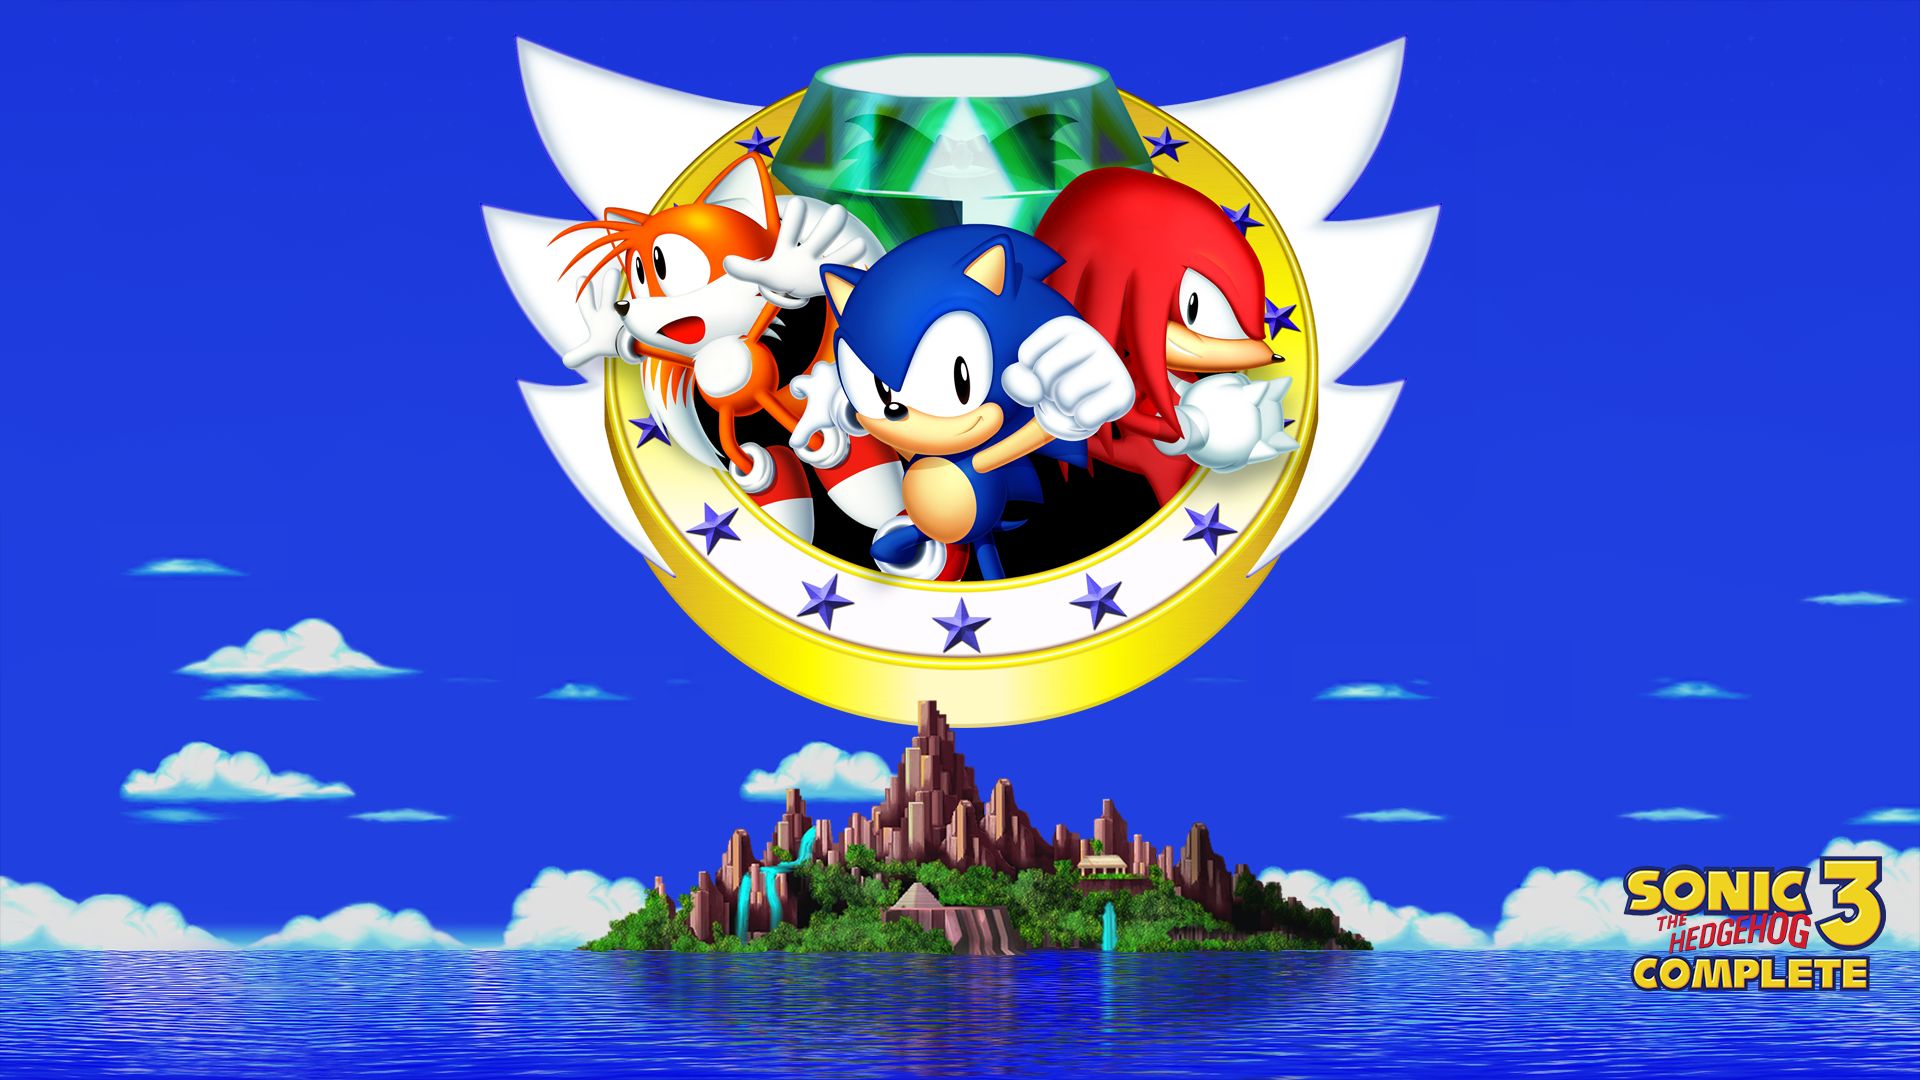 Sonic The Hedgehog HD Wallpaper Background